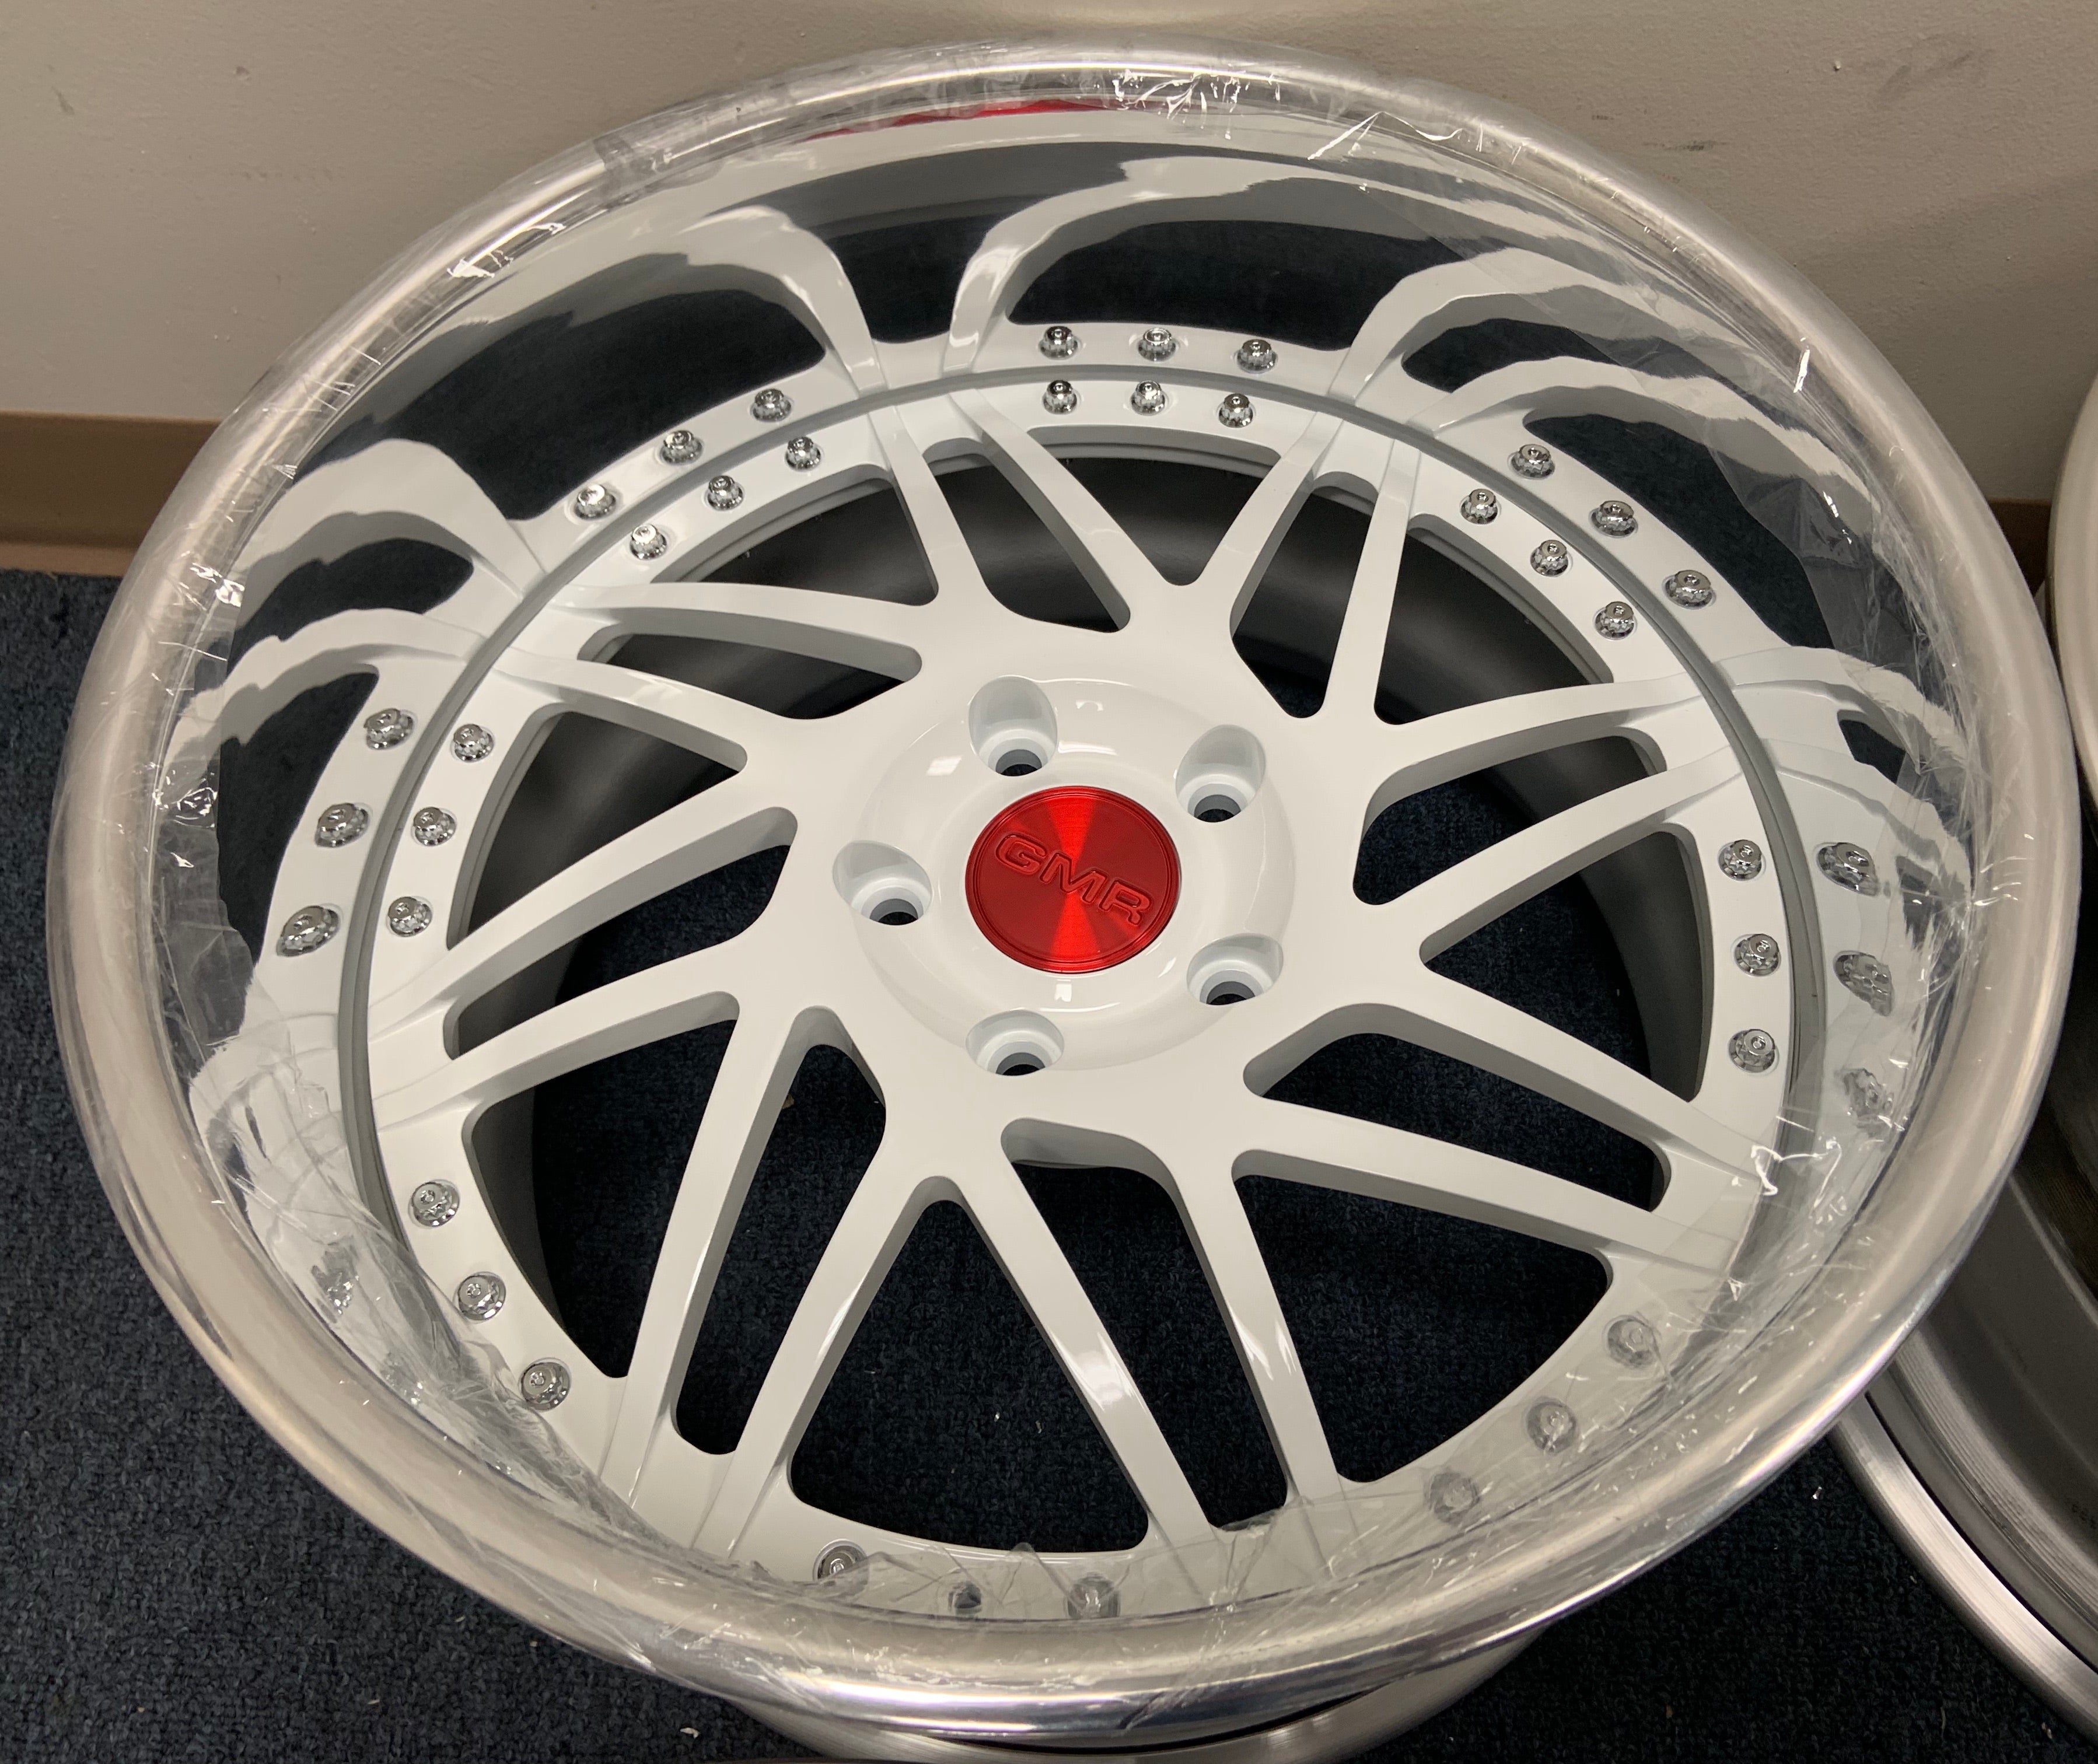 18” GMR GS-107 5x114.3 *BUILT TO ORDER*